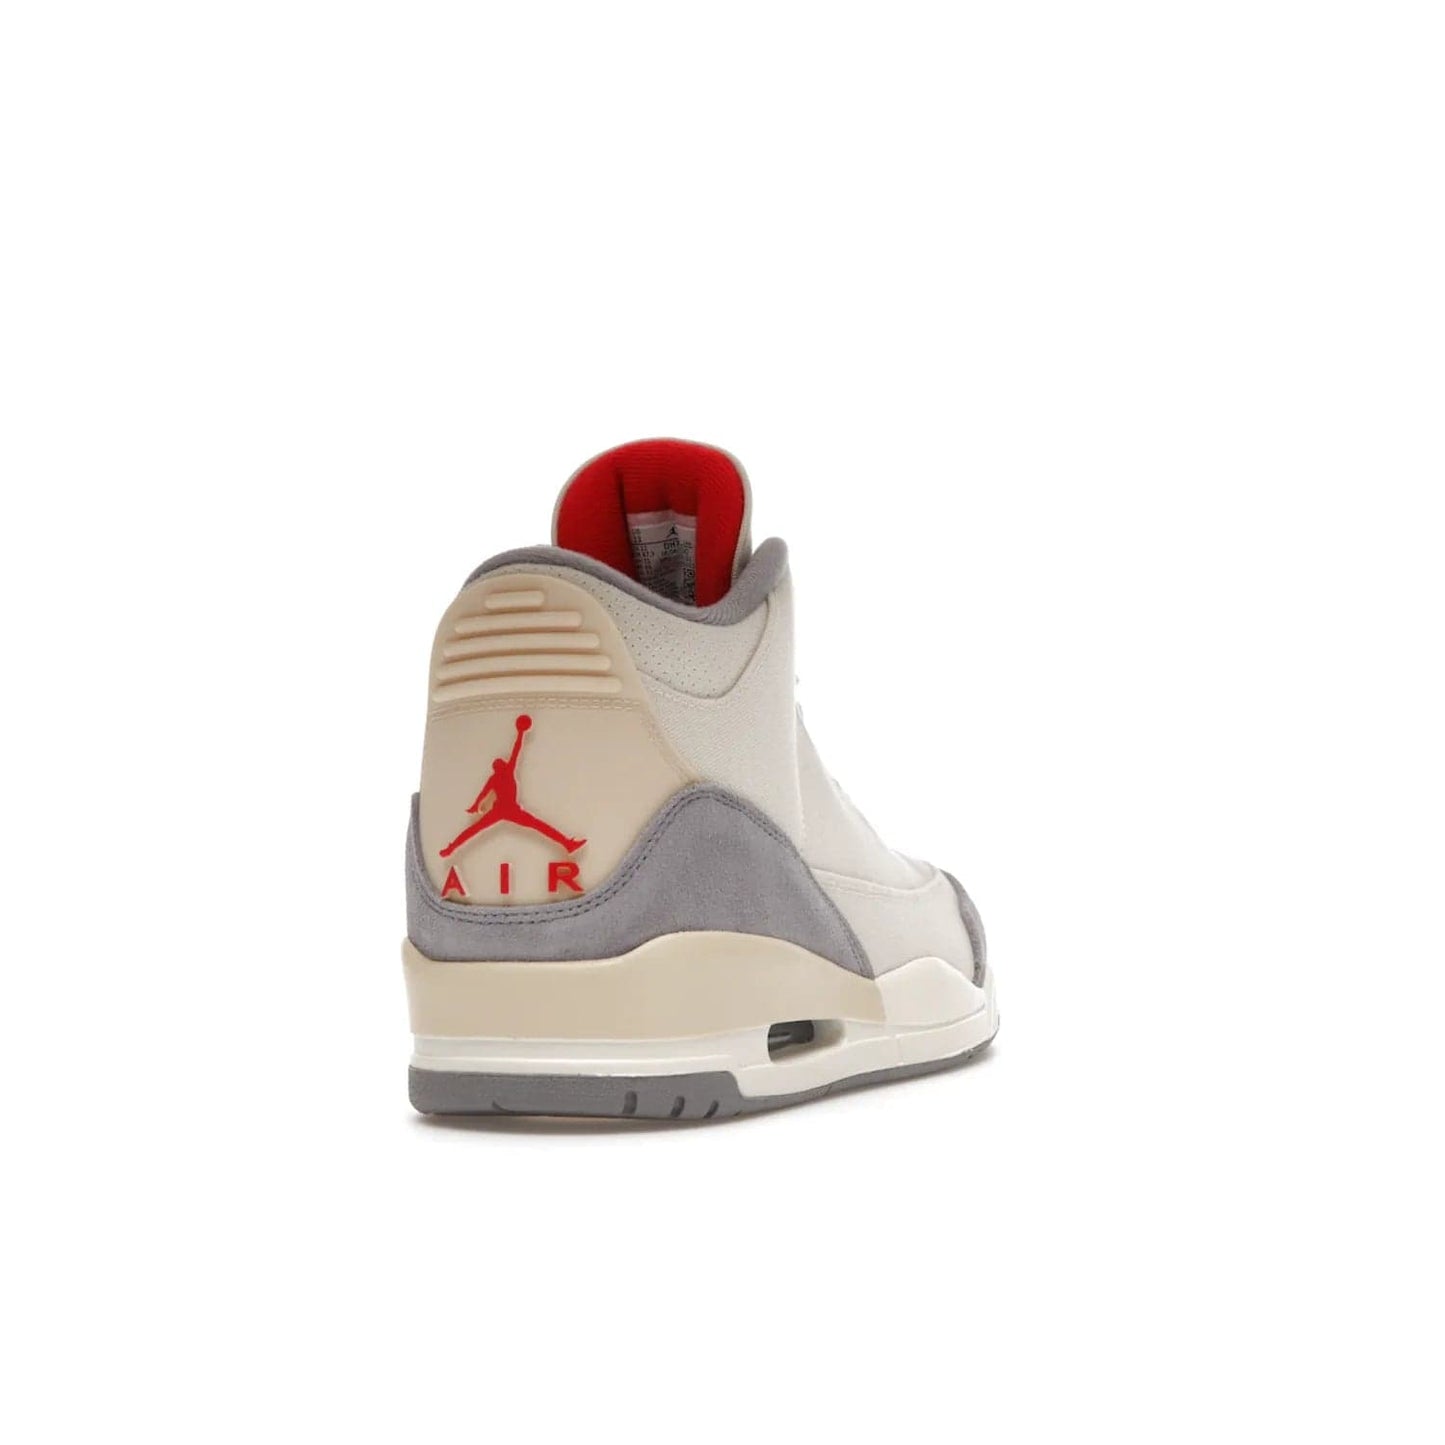 Jordan 3 Retro Muslin - Image 30 - Only at www.BallersClubKickz.com - Eye-catching Air Jordan 3 Retro Muslin in a neutral palette of grey, cream, and red. Featuring canvas upper, suede overlays and white/grey Air Max sole. Available in March 2022.